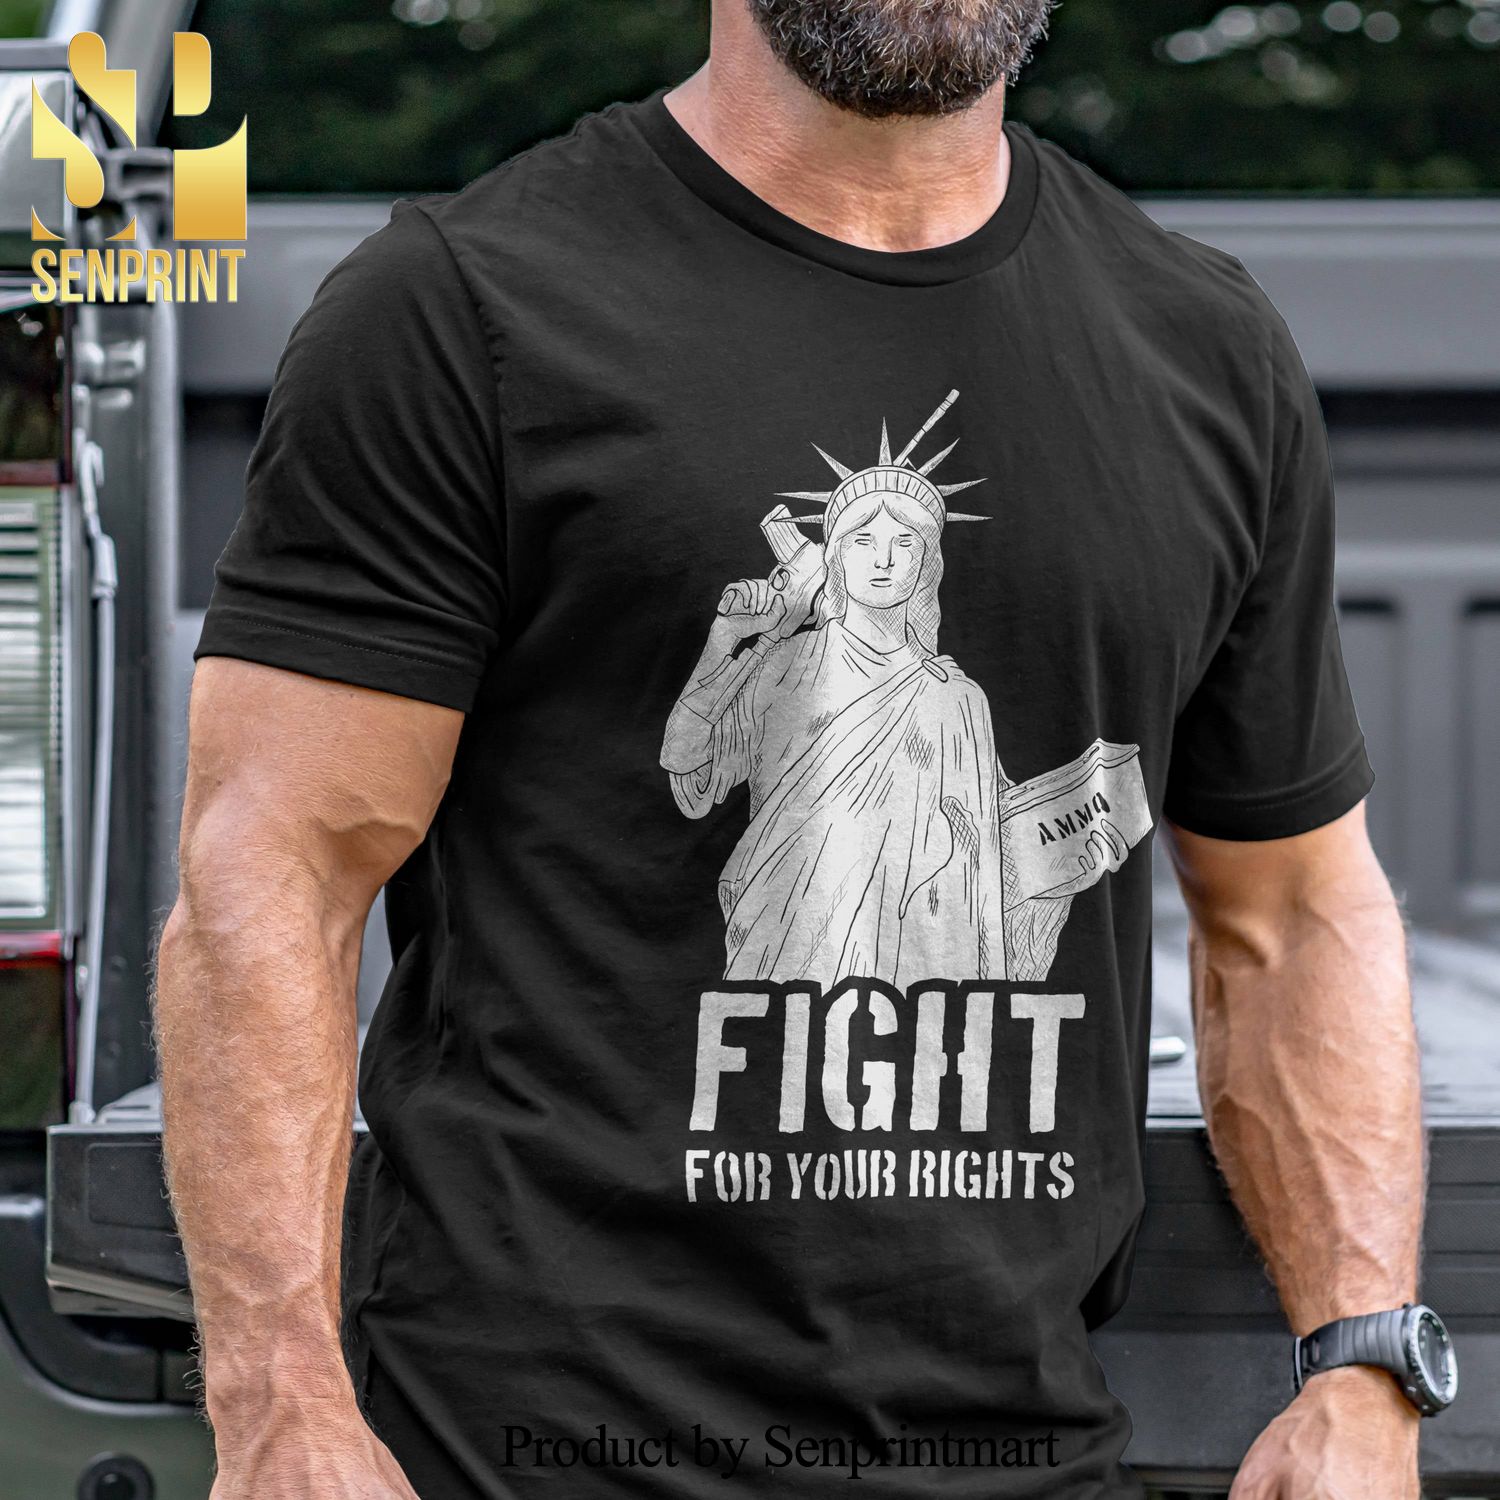 Fight for your Rights Military Unisex Shirt